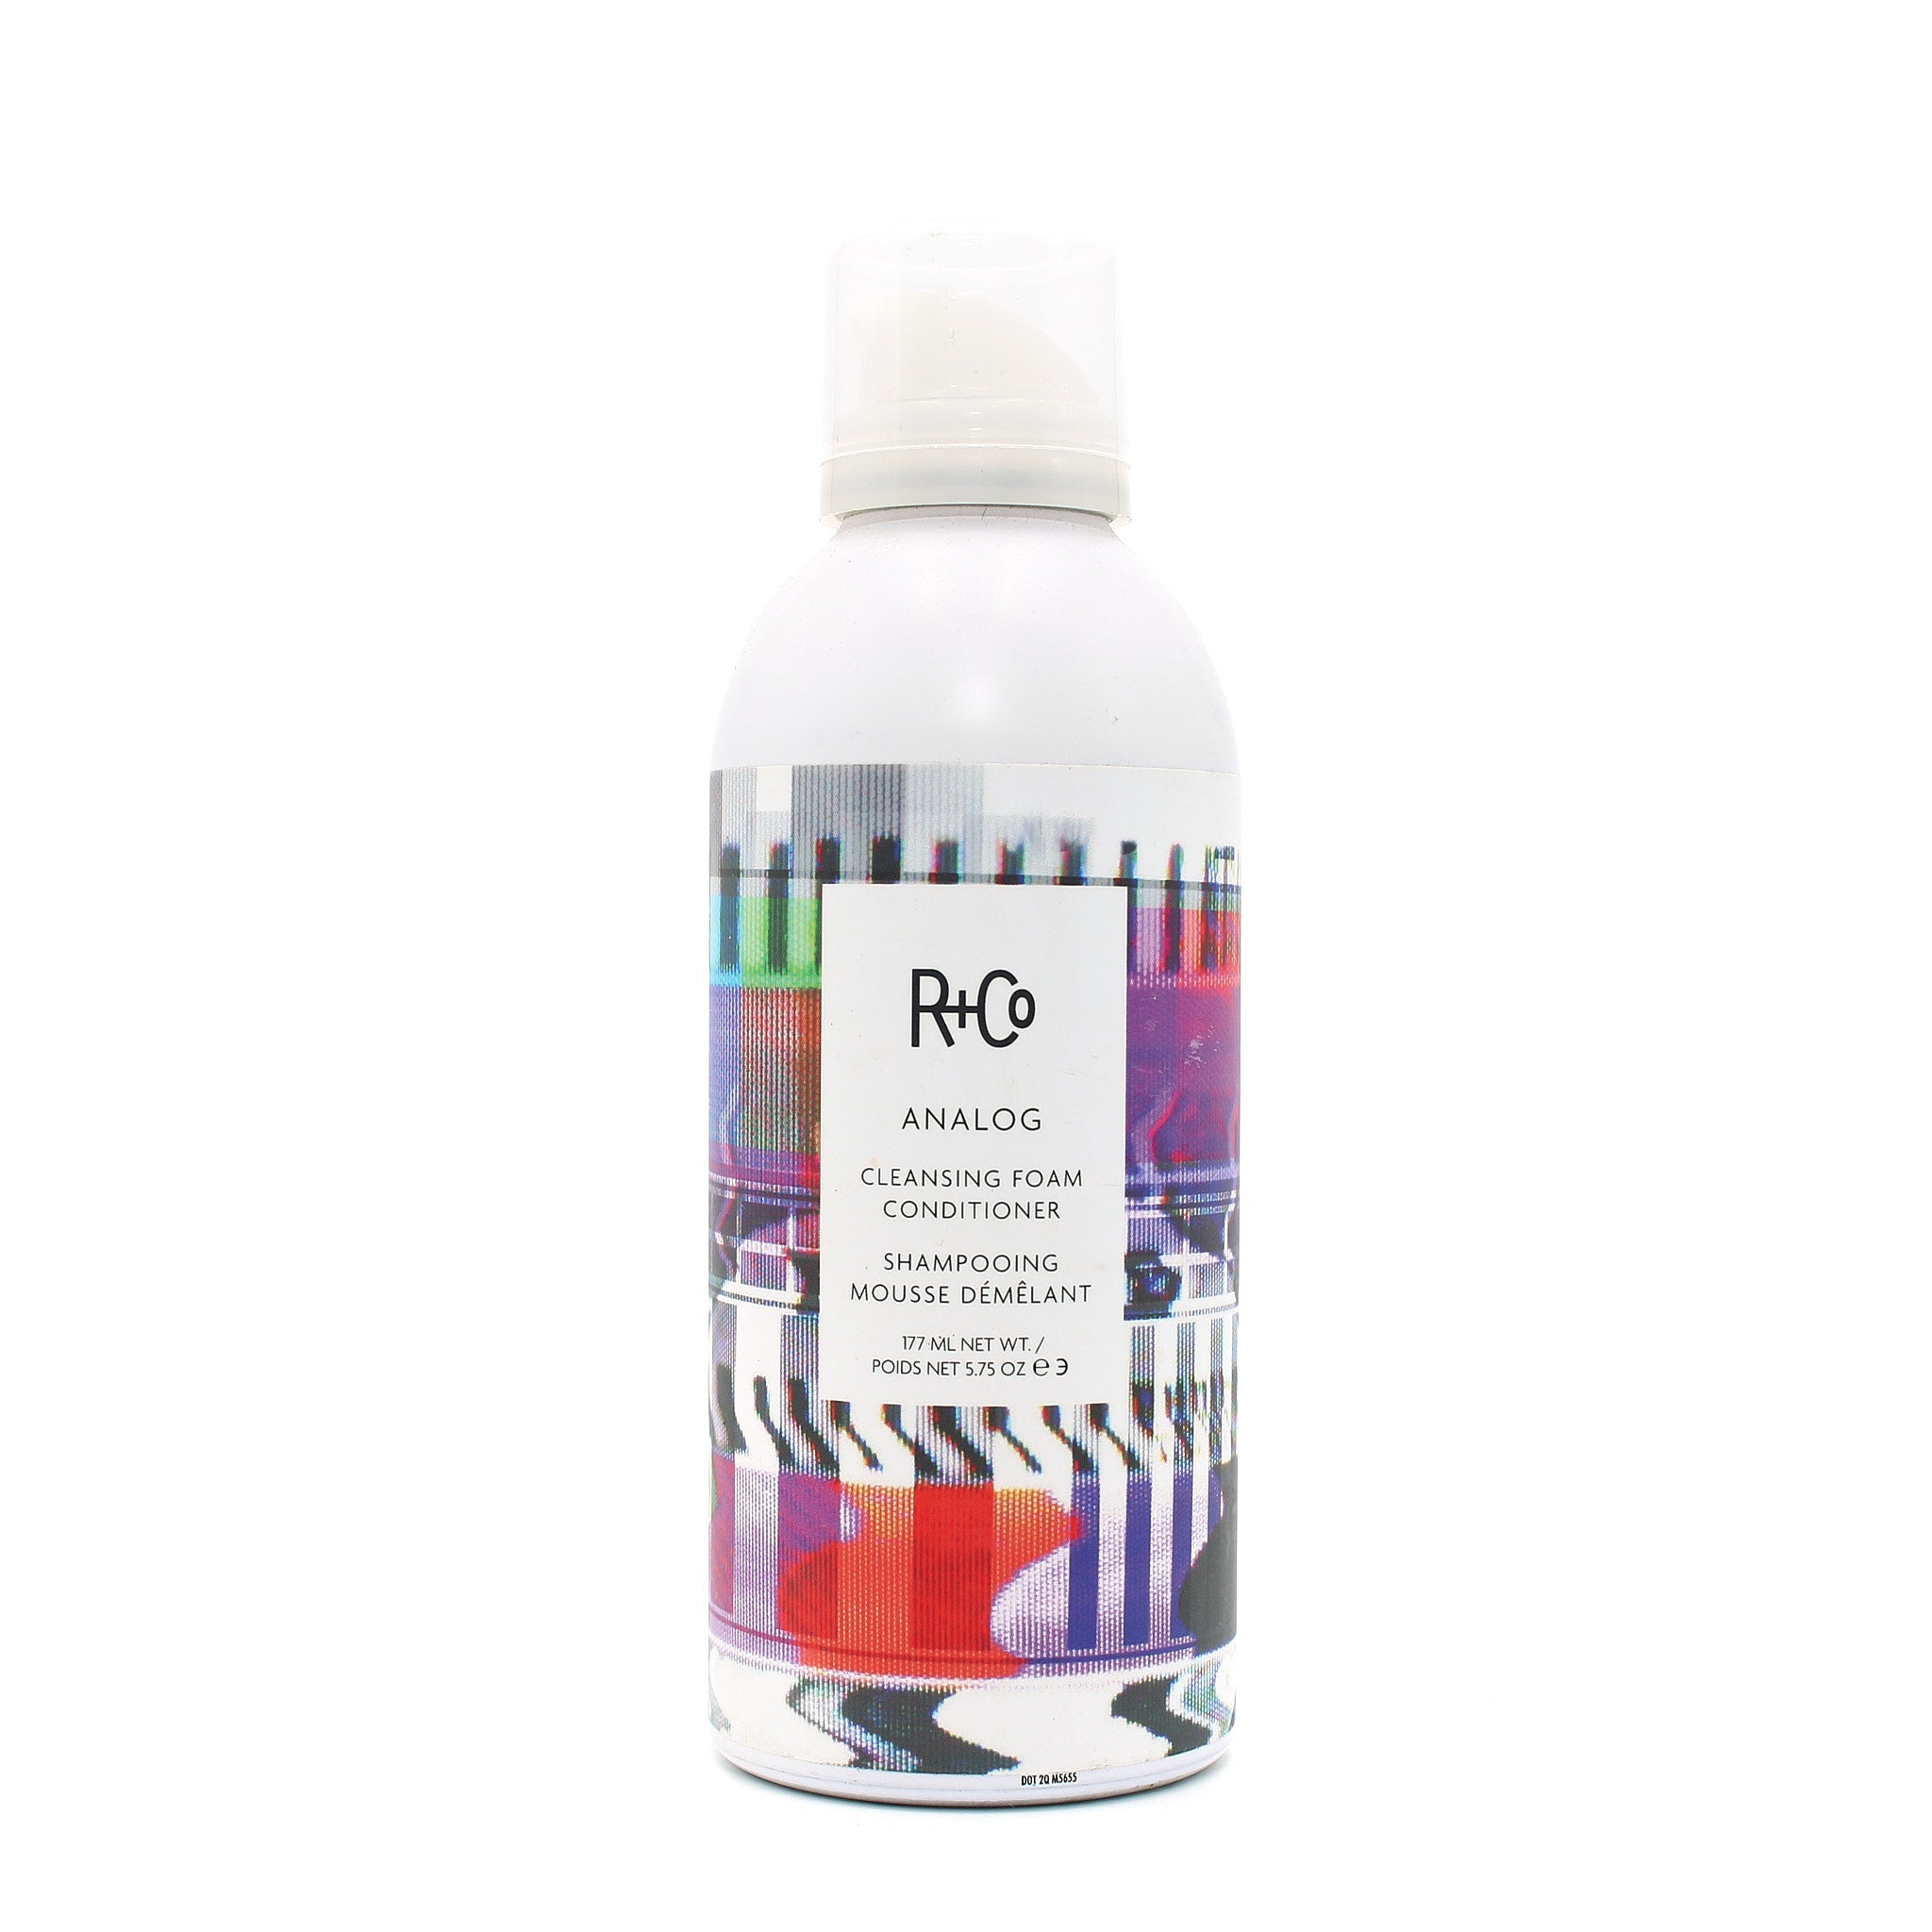 R+CO Analog Cleansing Foam Conditioner 5.75 oz